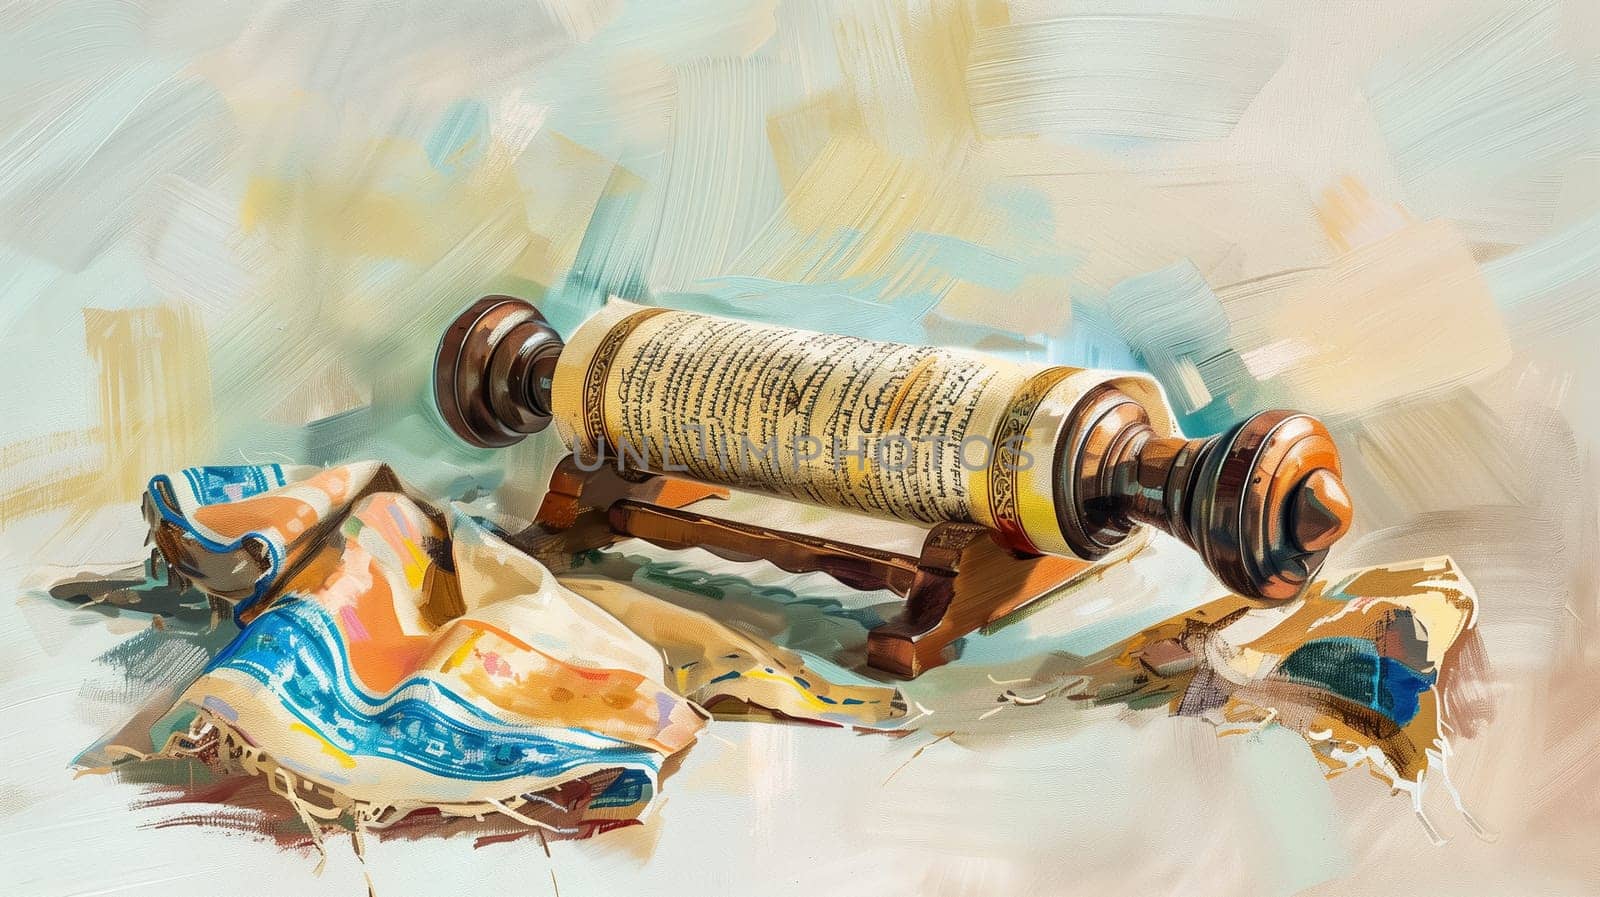 Traditional Jewish Torah Scroll Adorned With a Talit During Shavuot Celebration by Sd28DimoN_1976